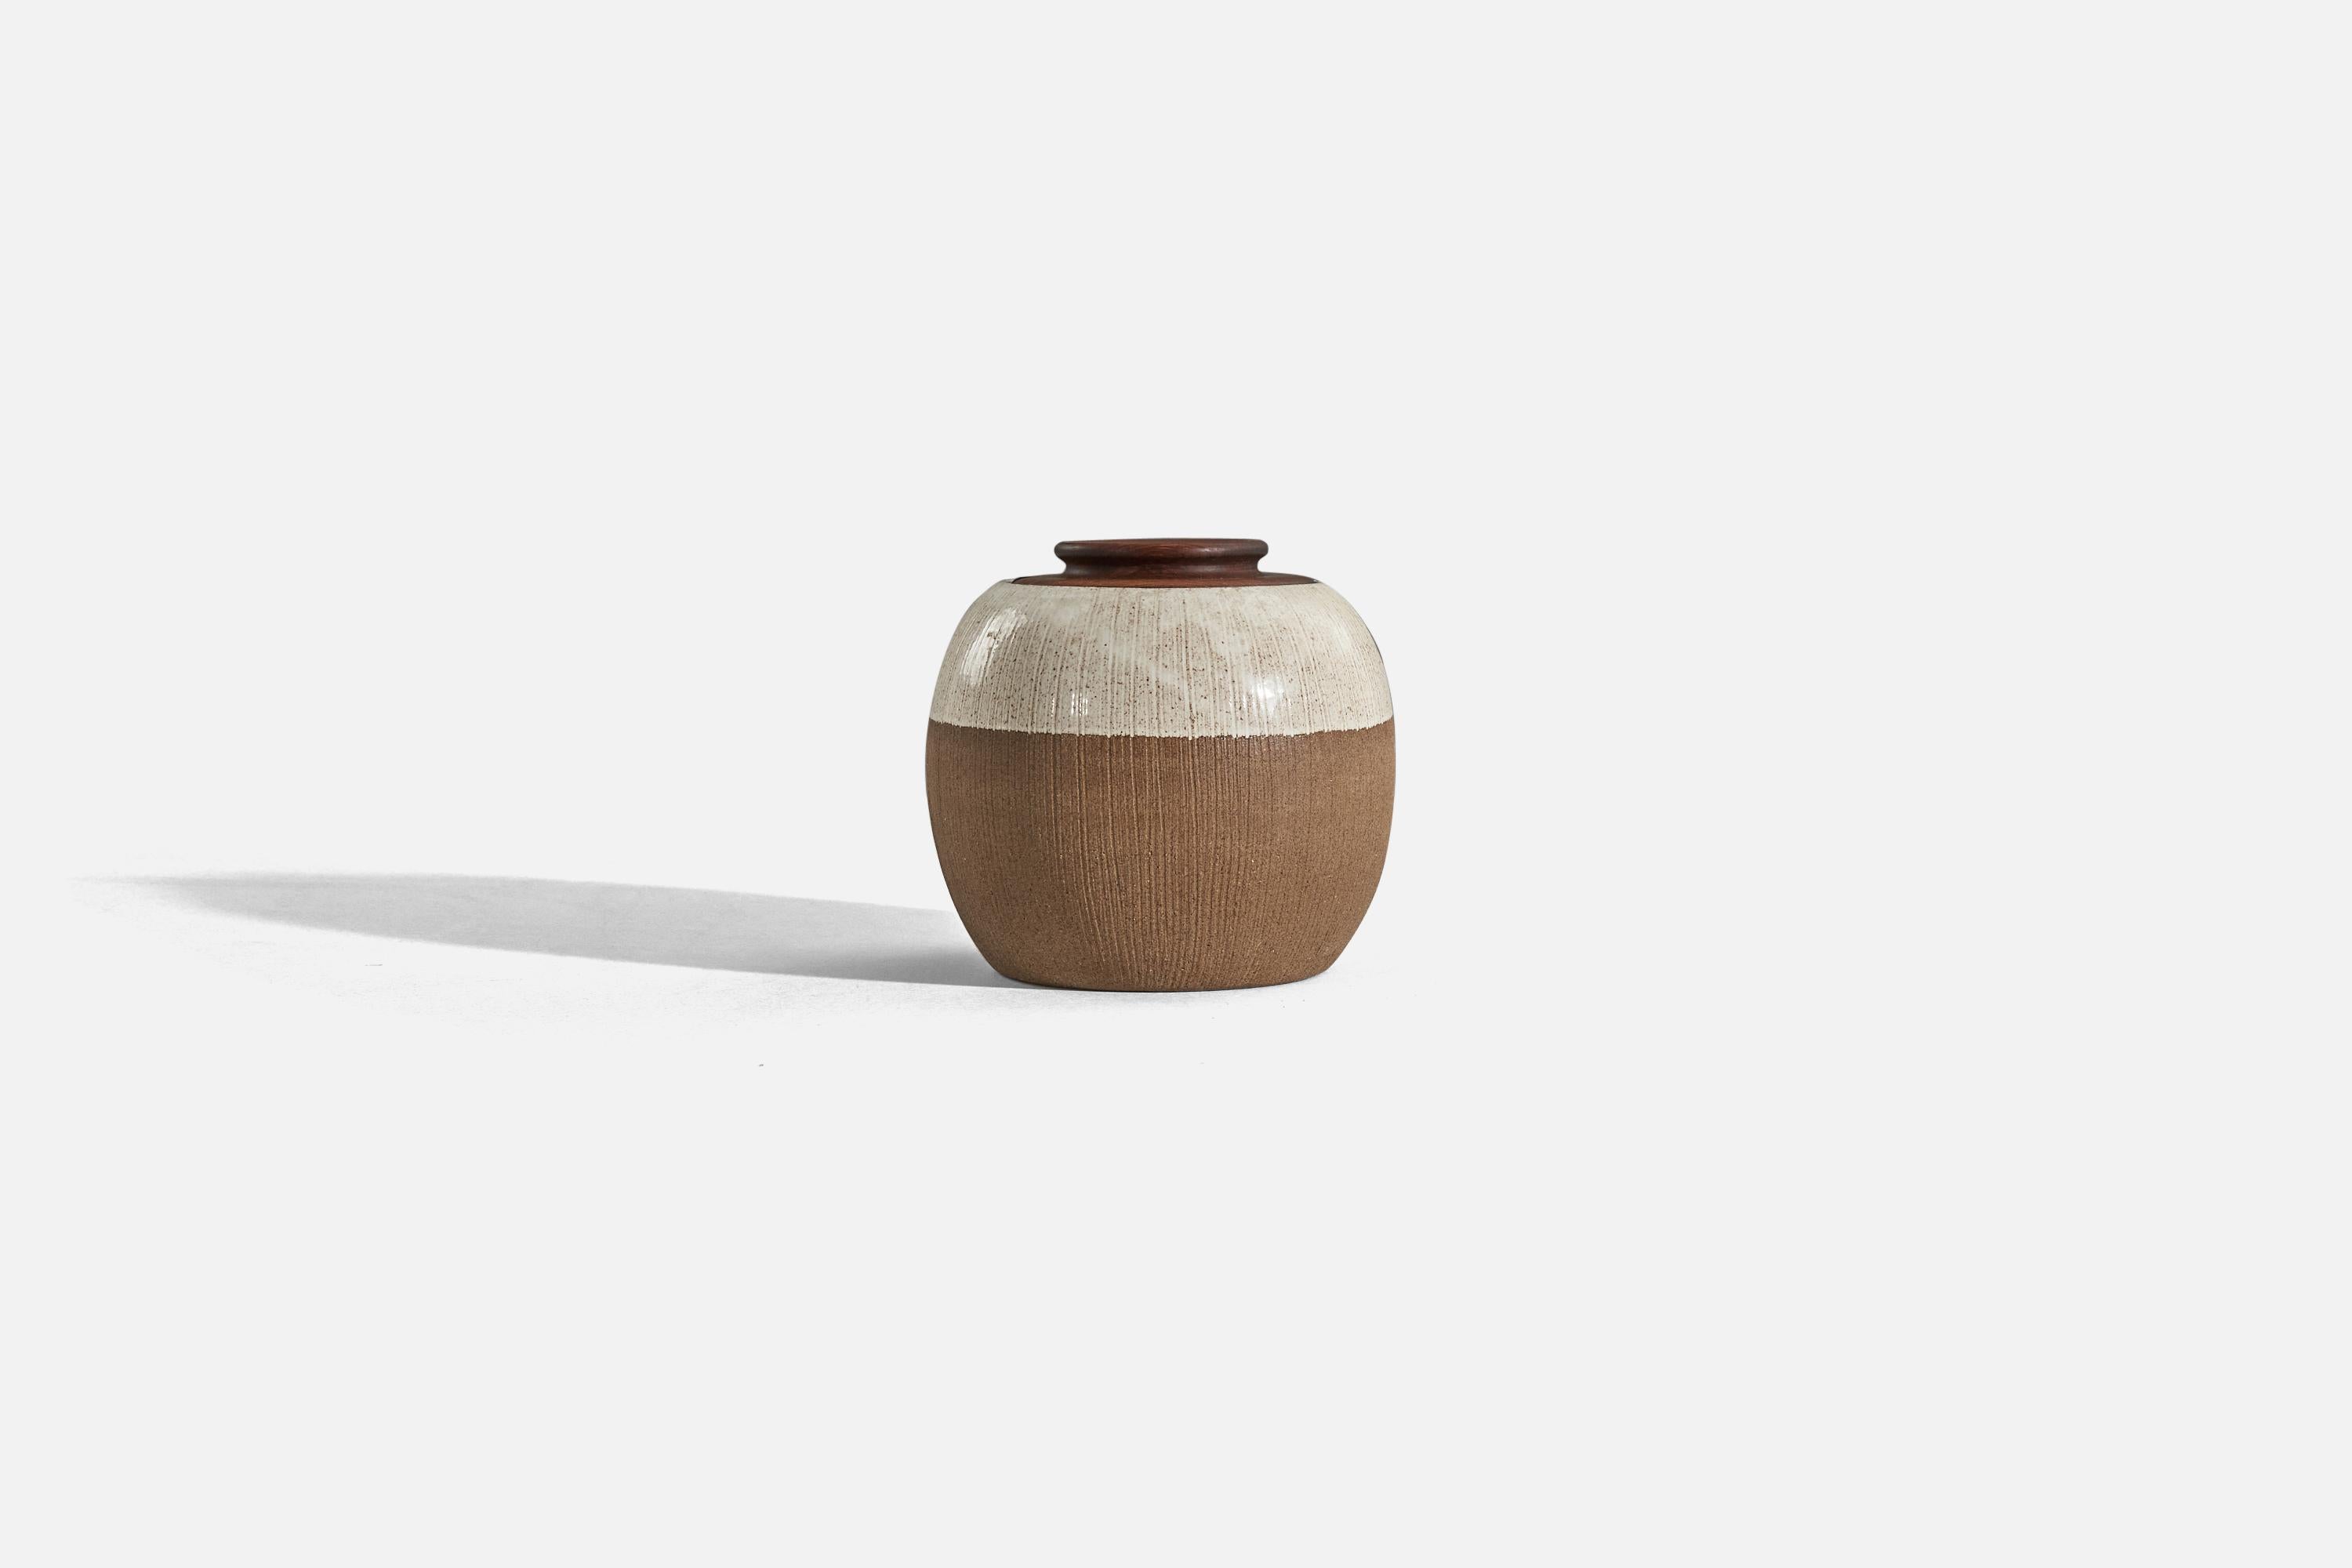 A semi-glazed stoneware lidded jar, designed by Sture G. Ohlsson and produced by his own workshop, 